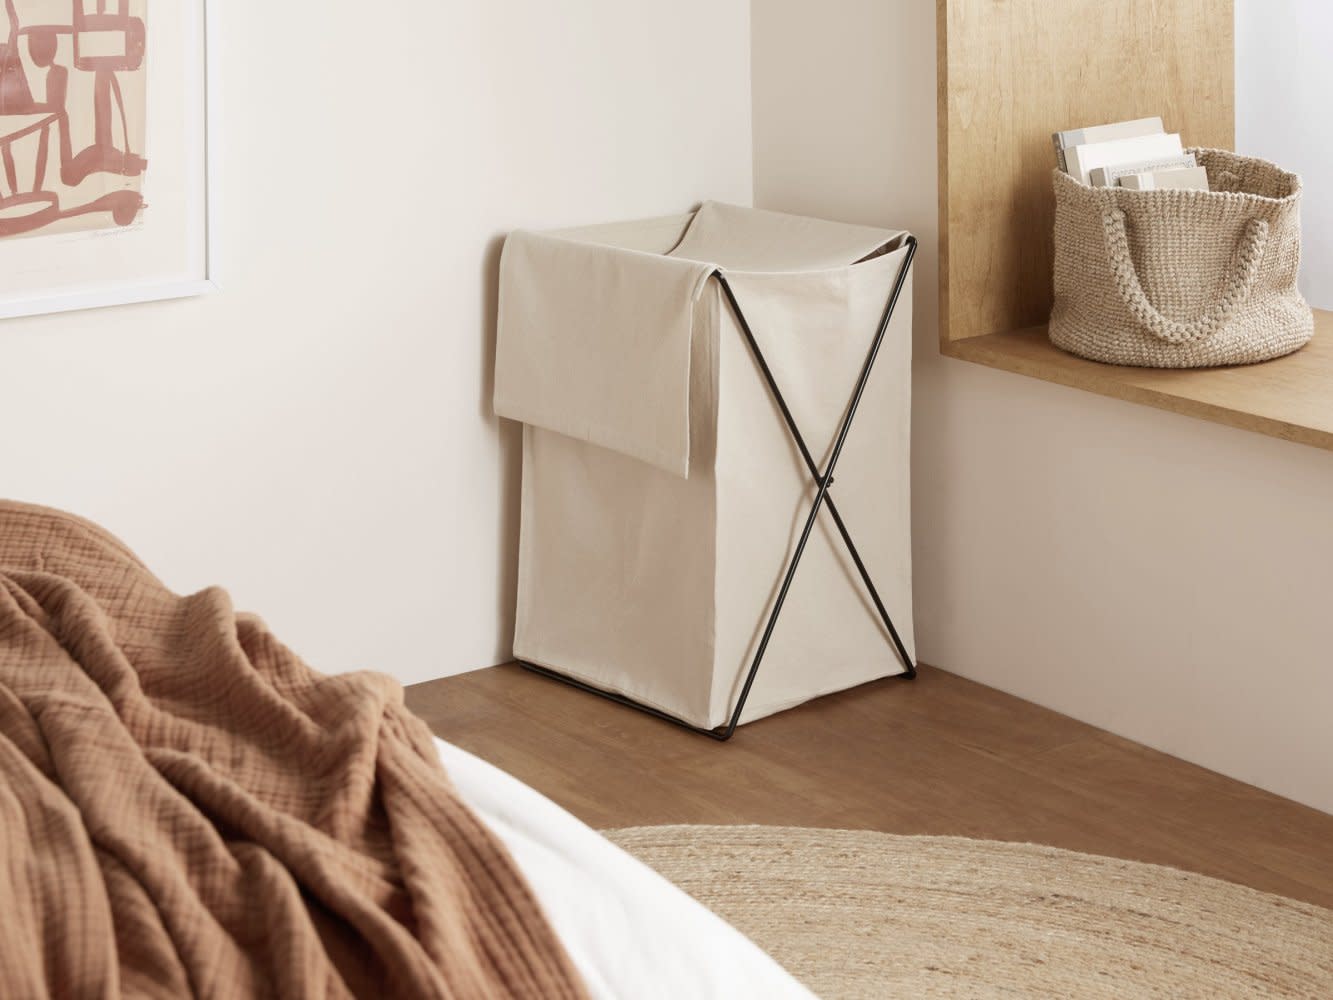 Canvas Laundry Hamper Shown In A Room